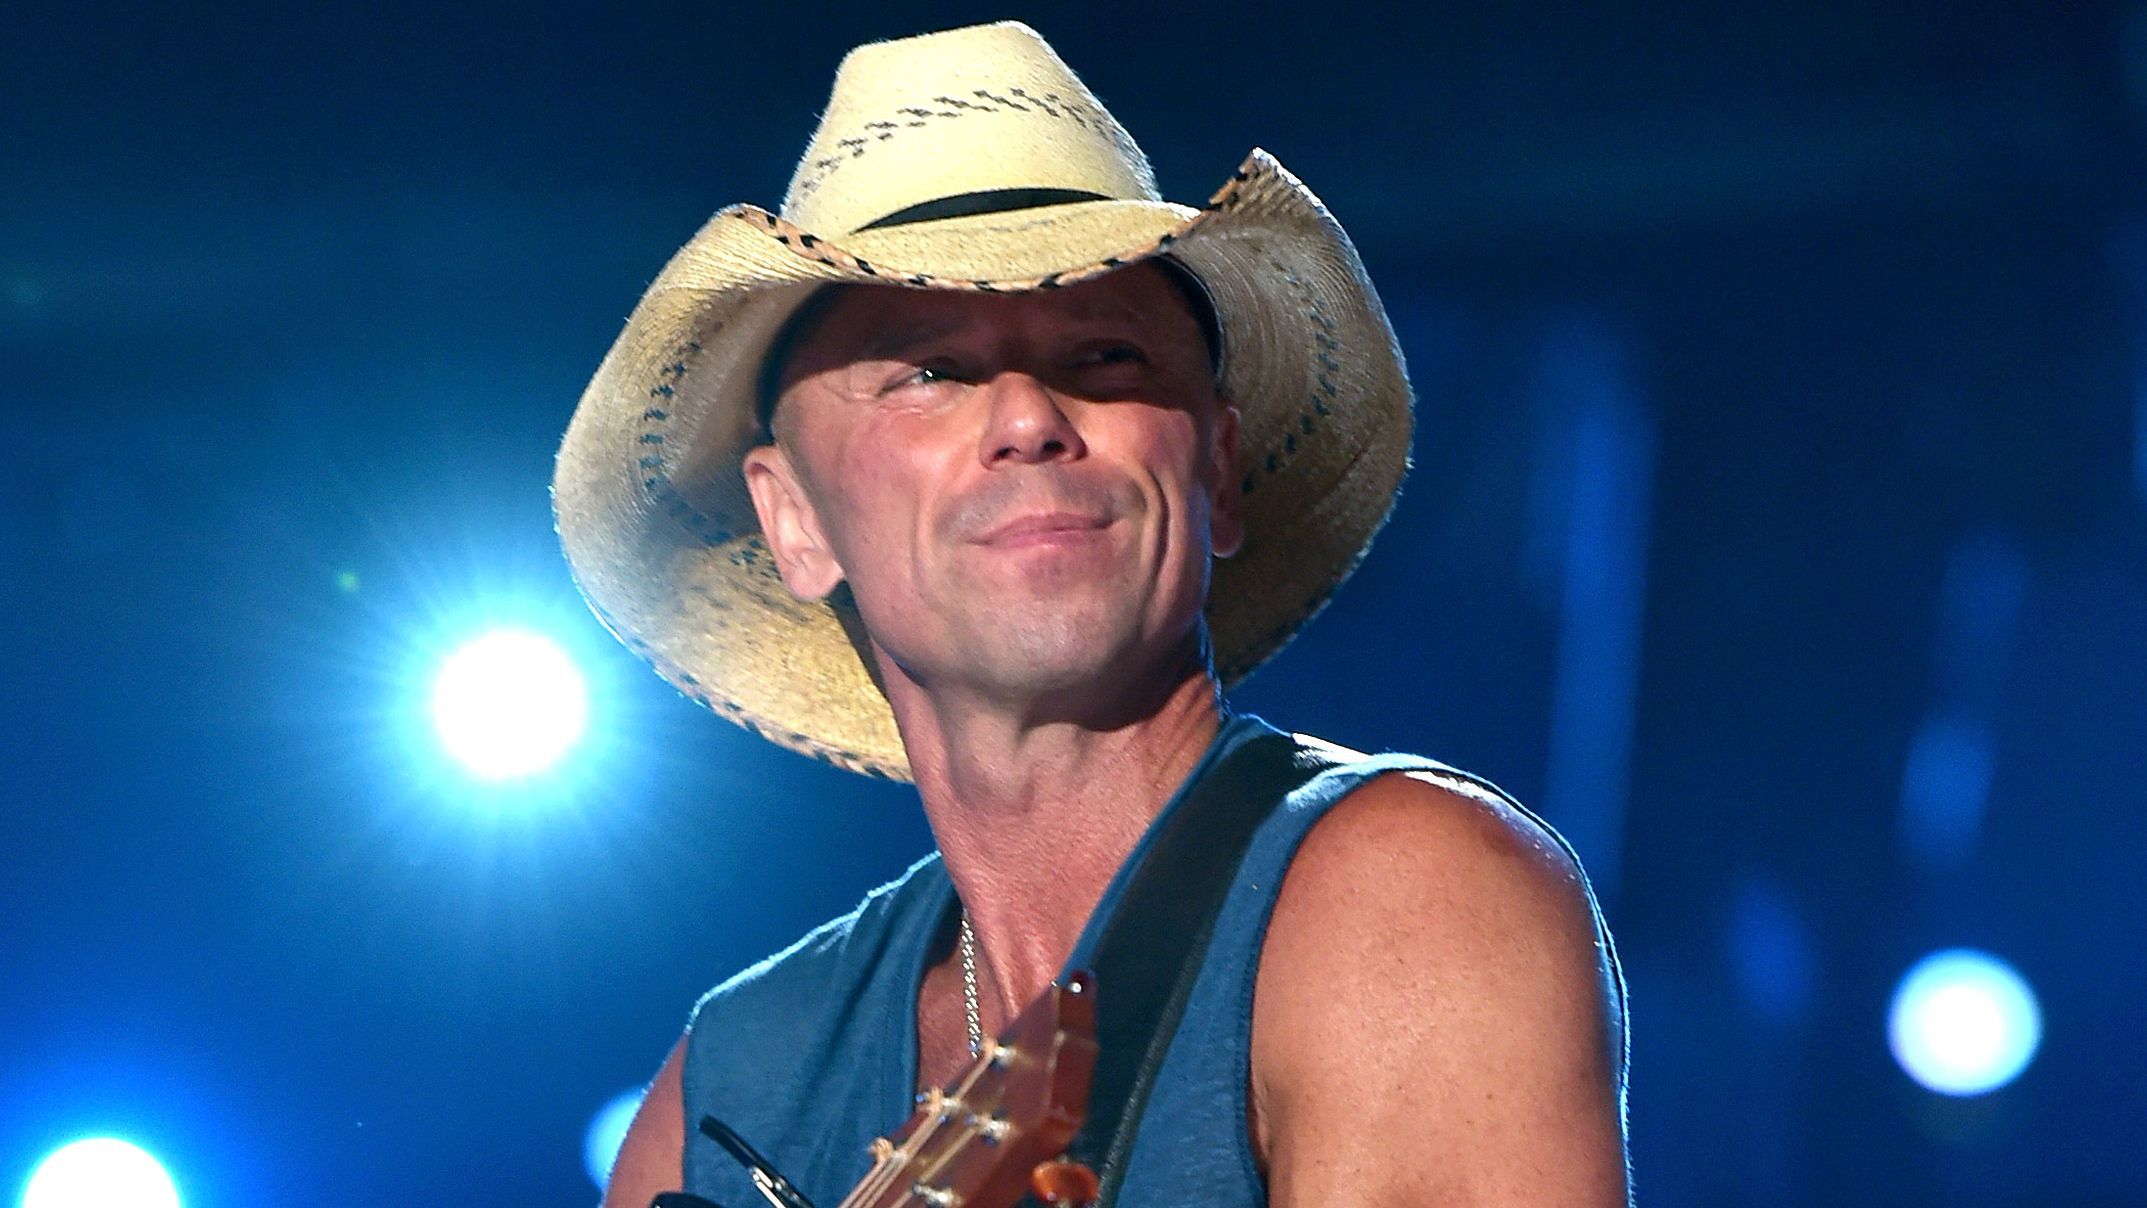 Kenny Chesney Finally Addresses The Rumors About His Love Life